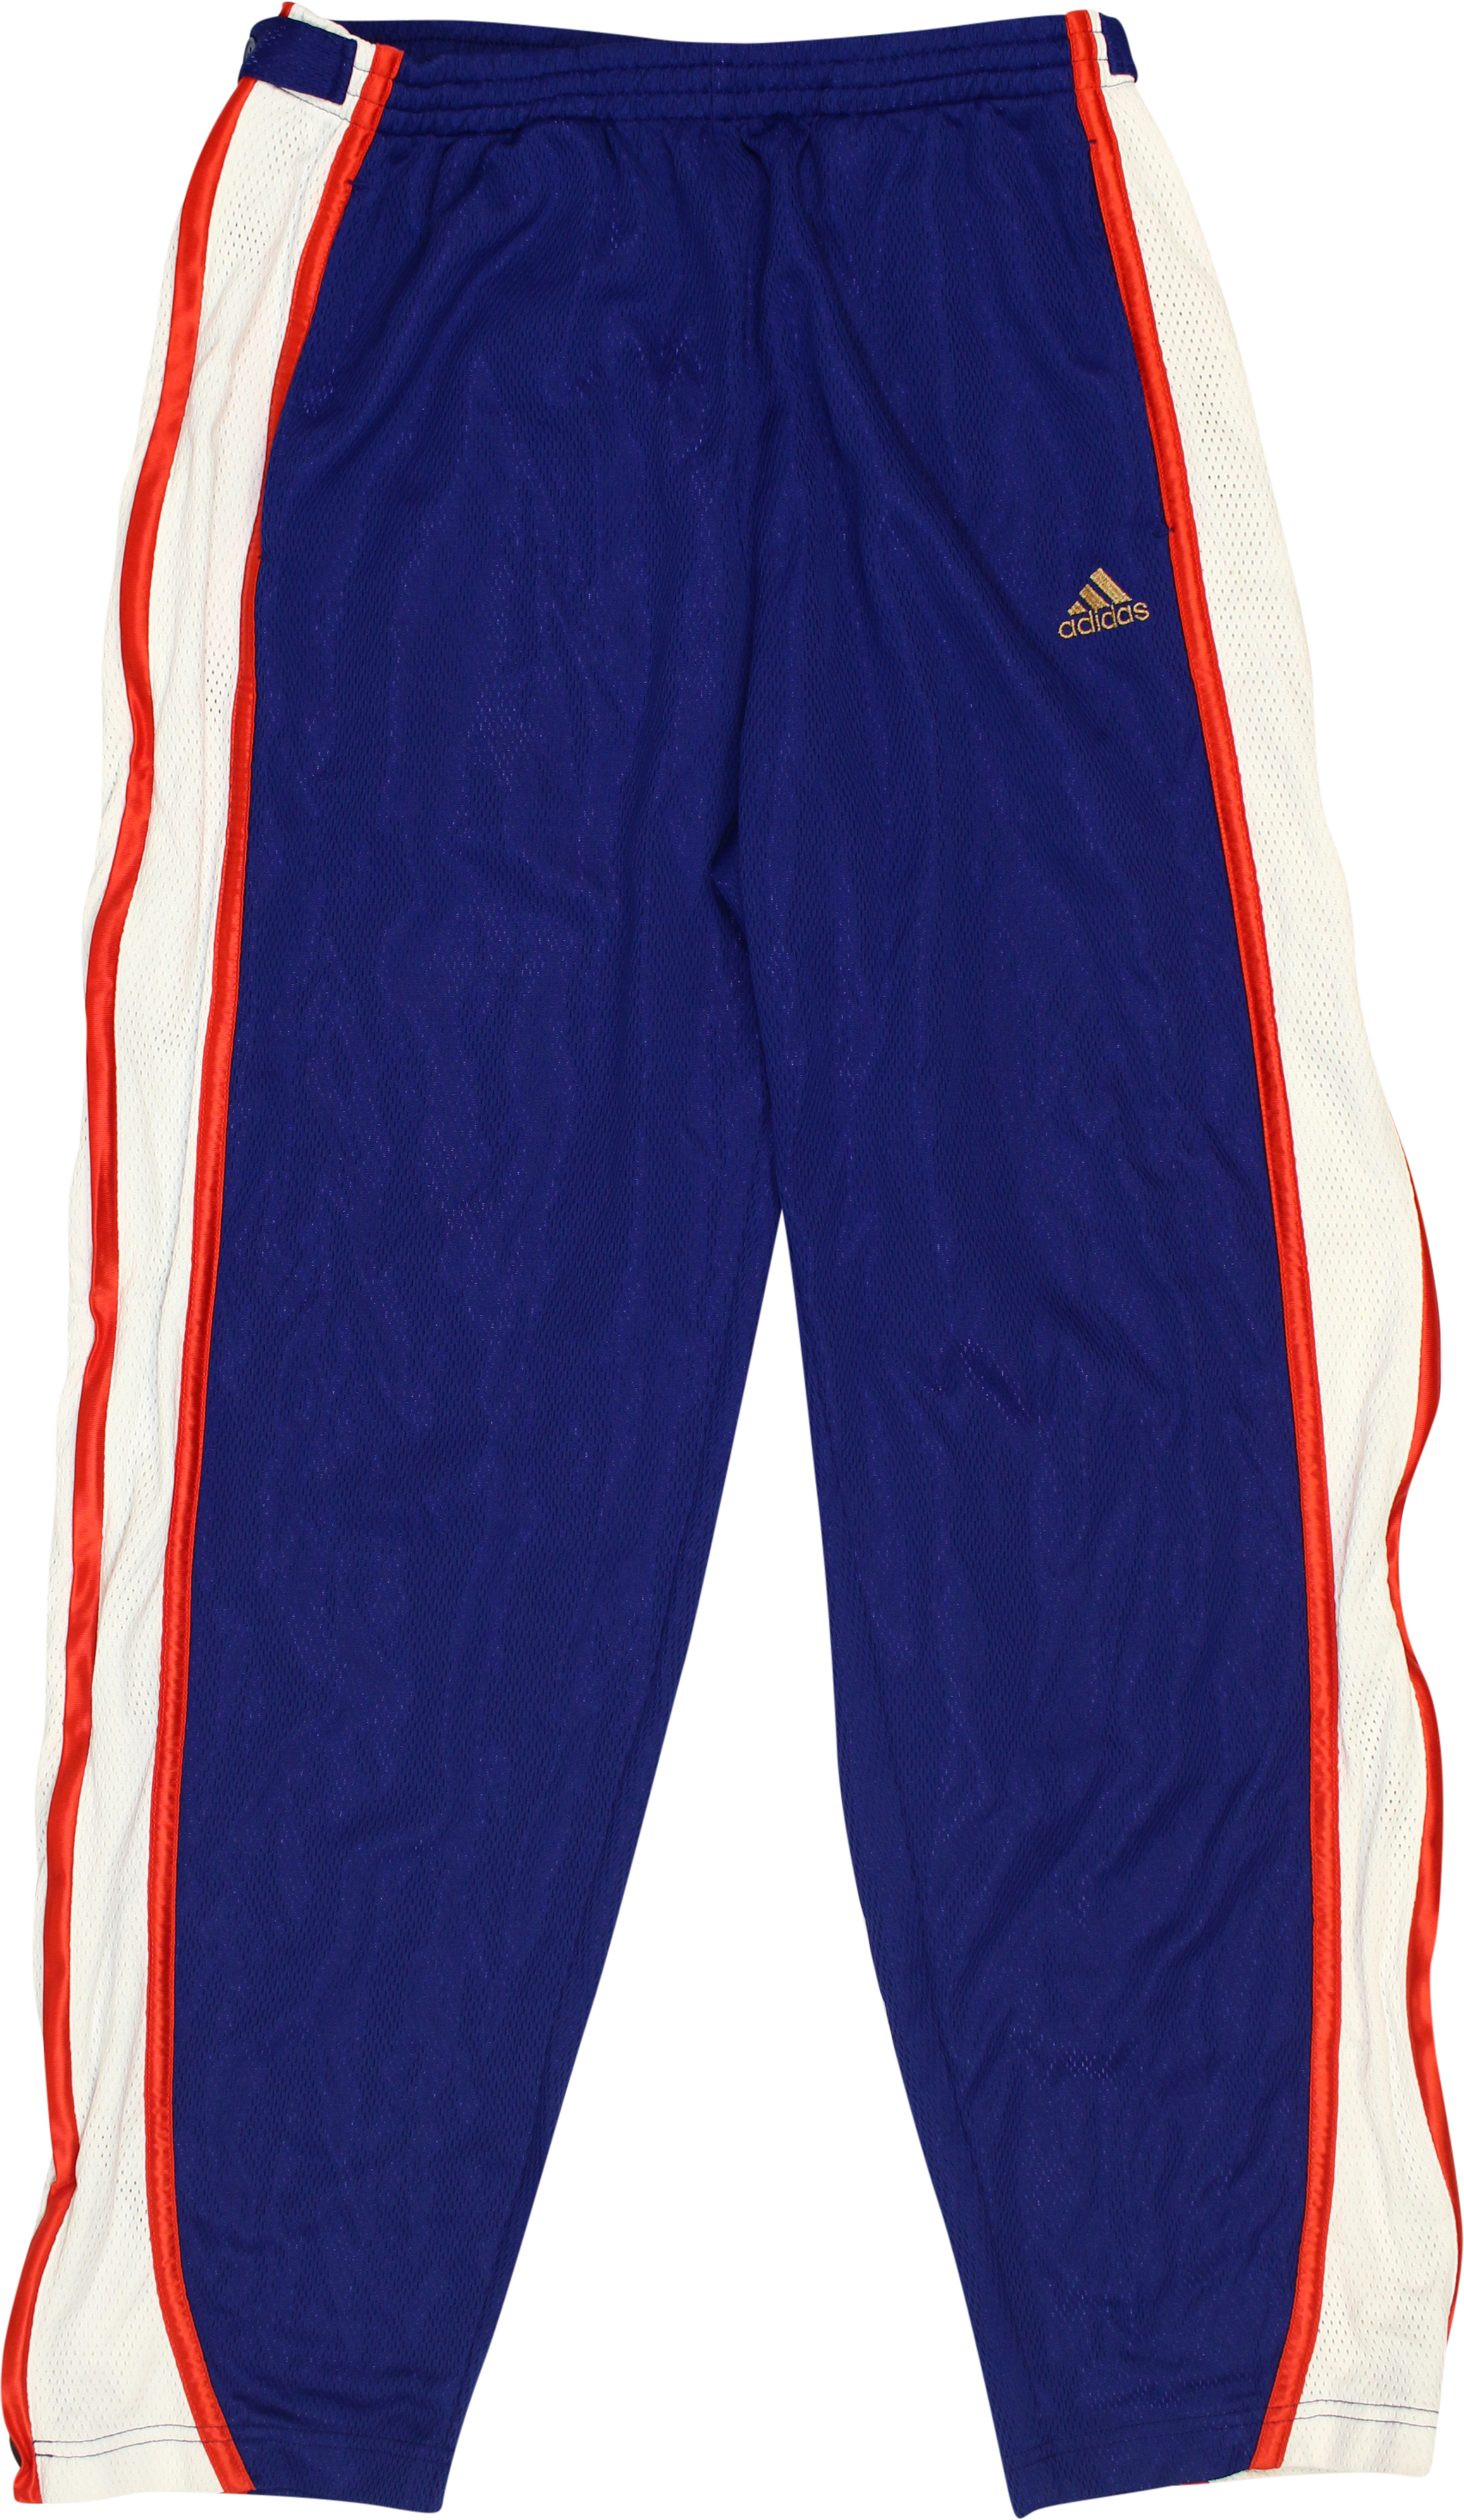 Mesh Joggers by Adidas